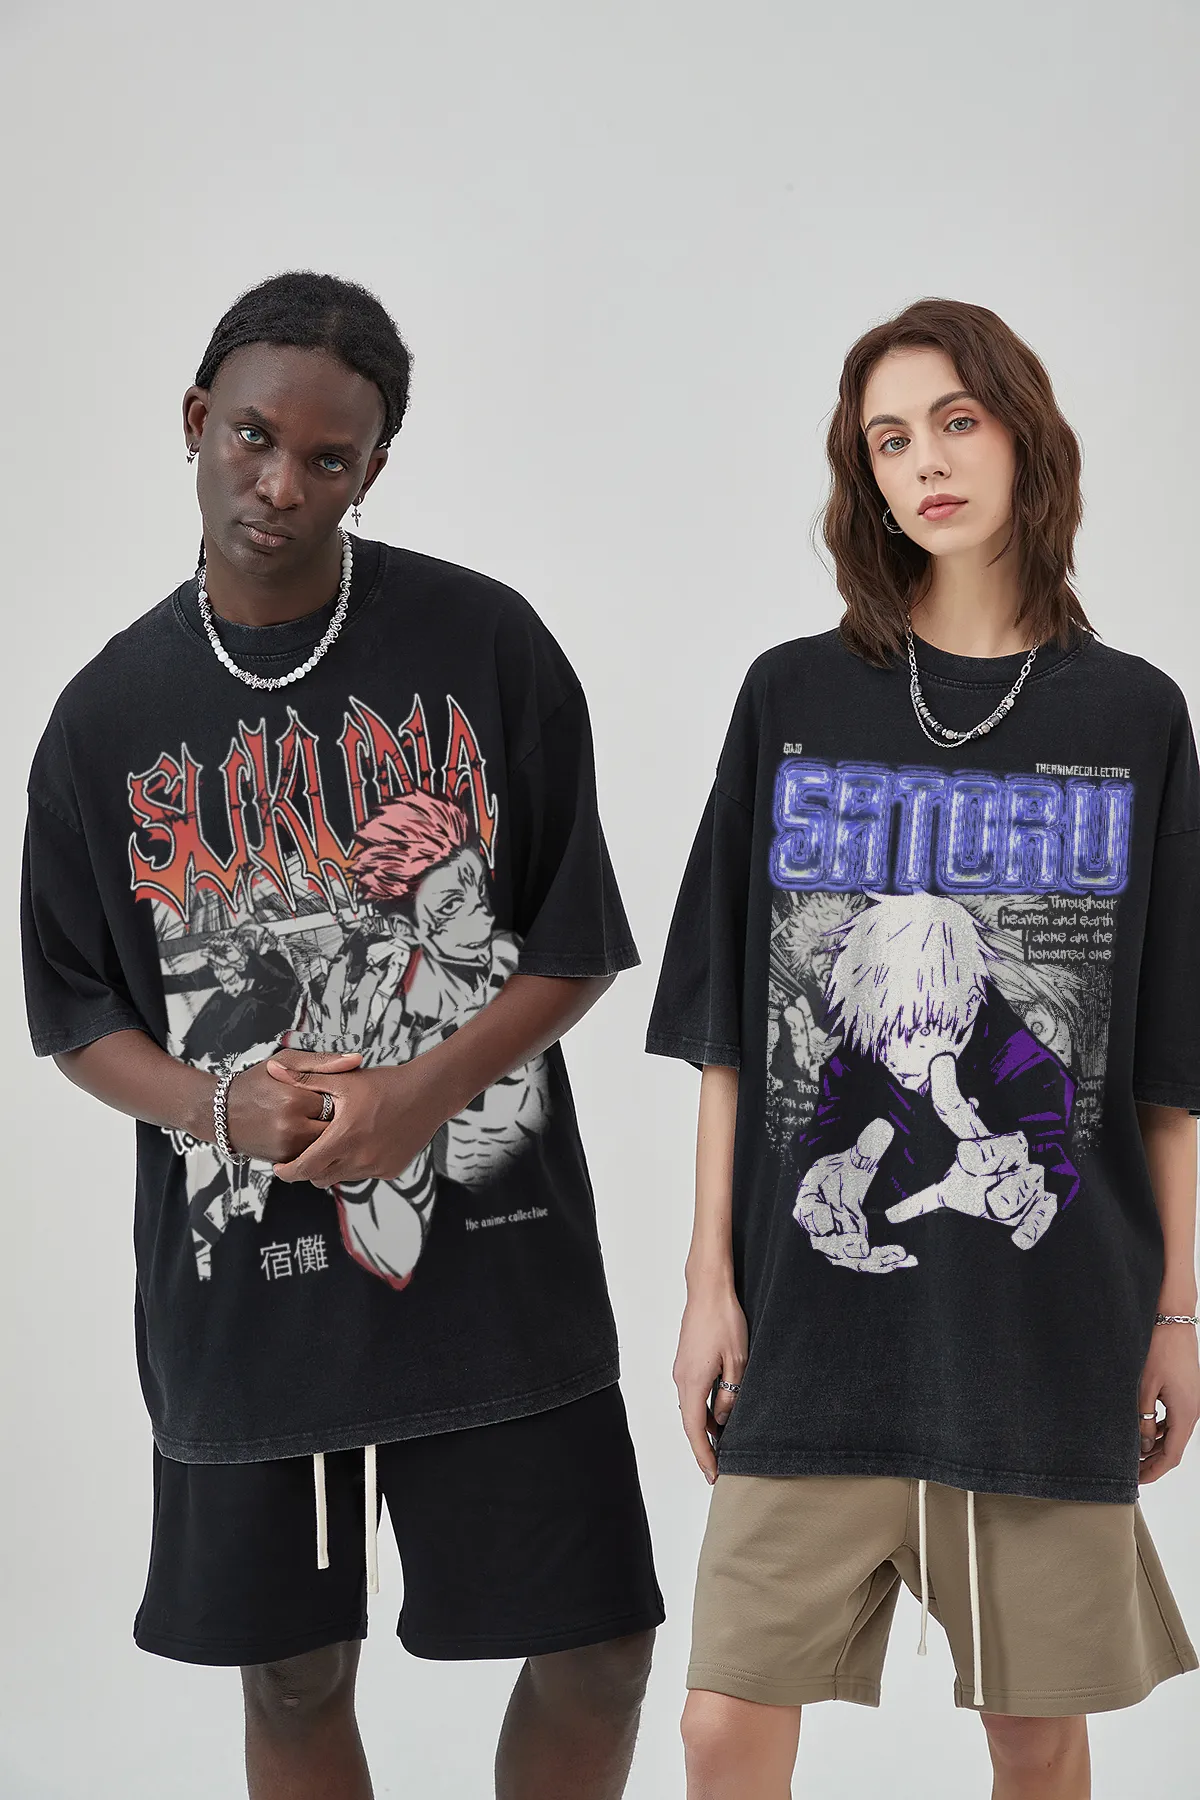 Anbu Apparel – Subtle Embroidered Anime Merch for Lowkey Fans